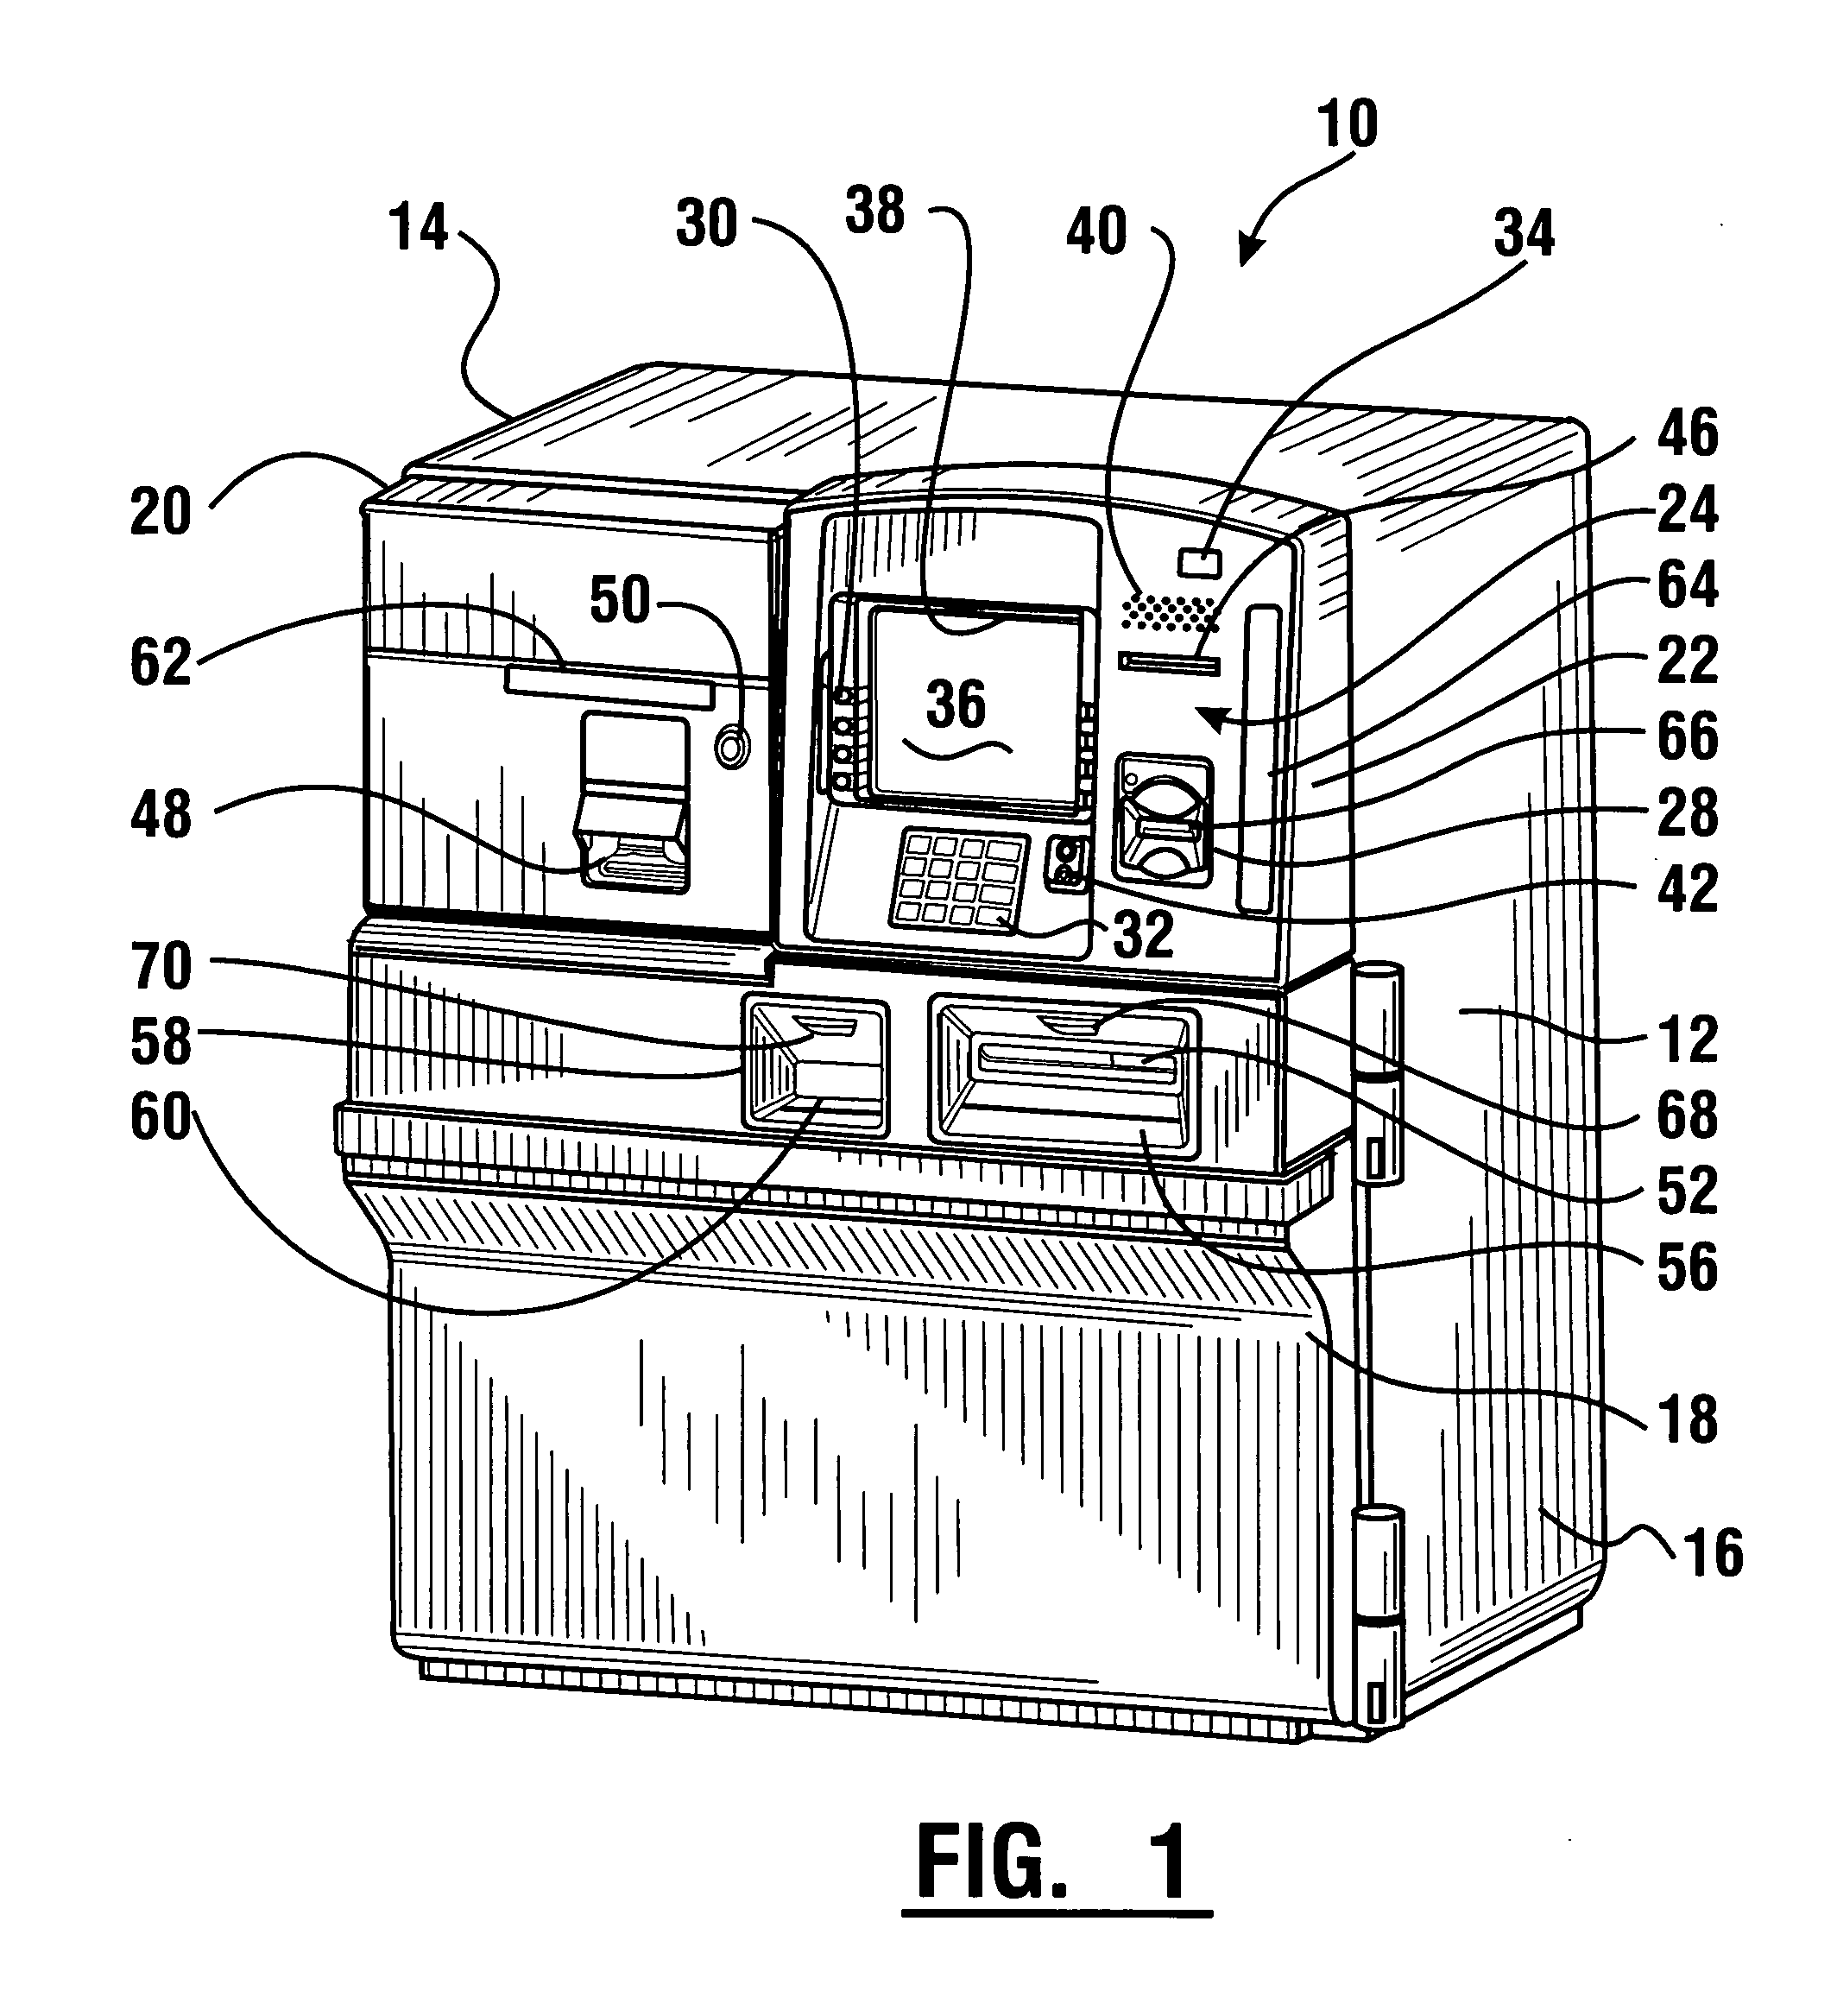 Automated banking machine that operates responsive to data read from data bearing records